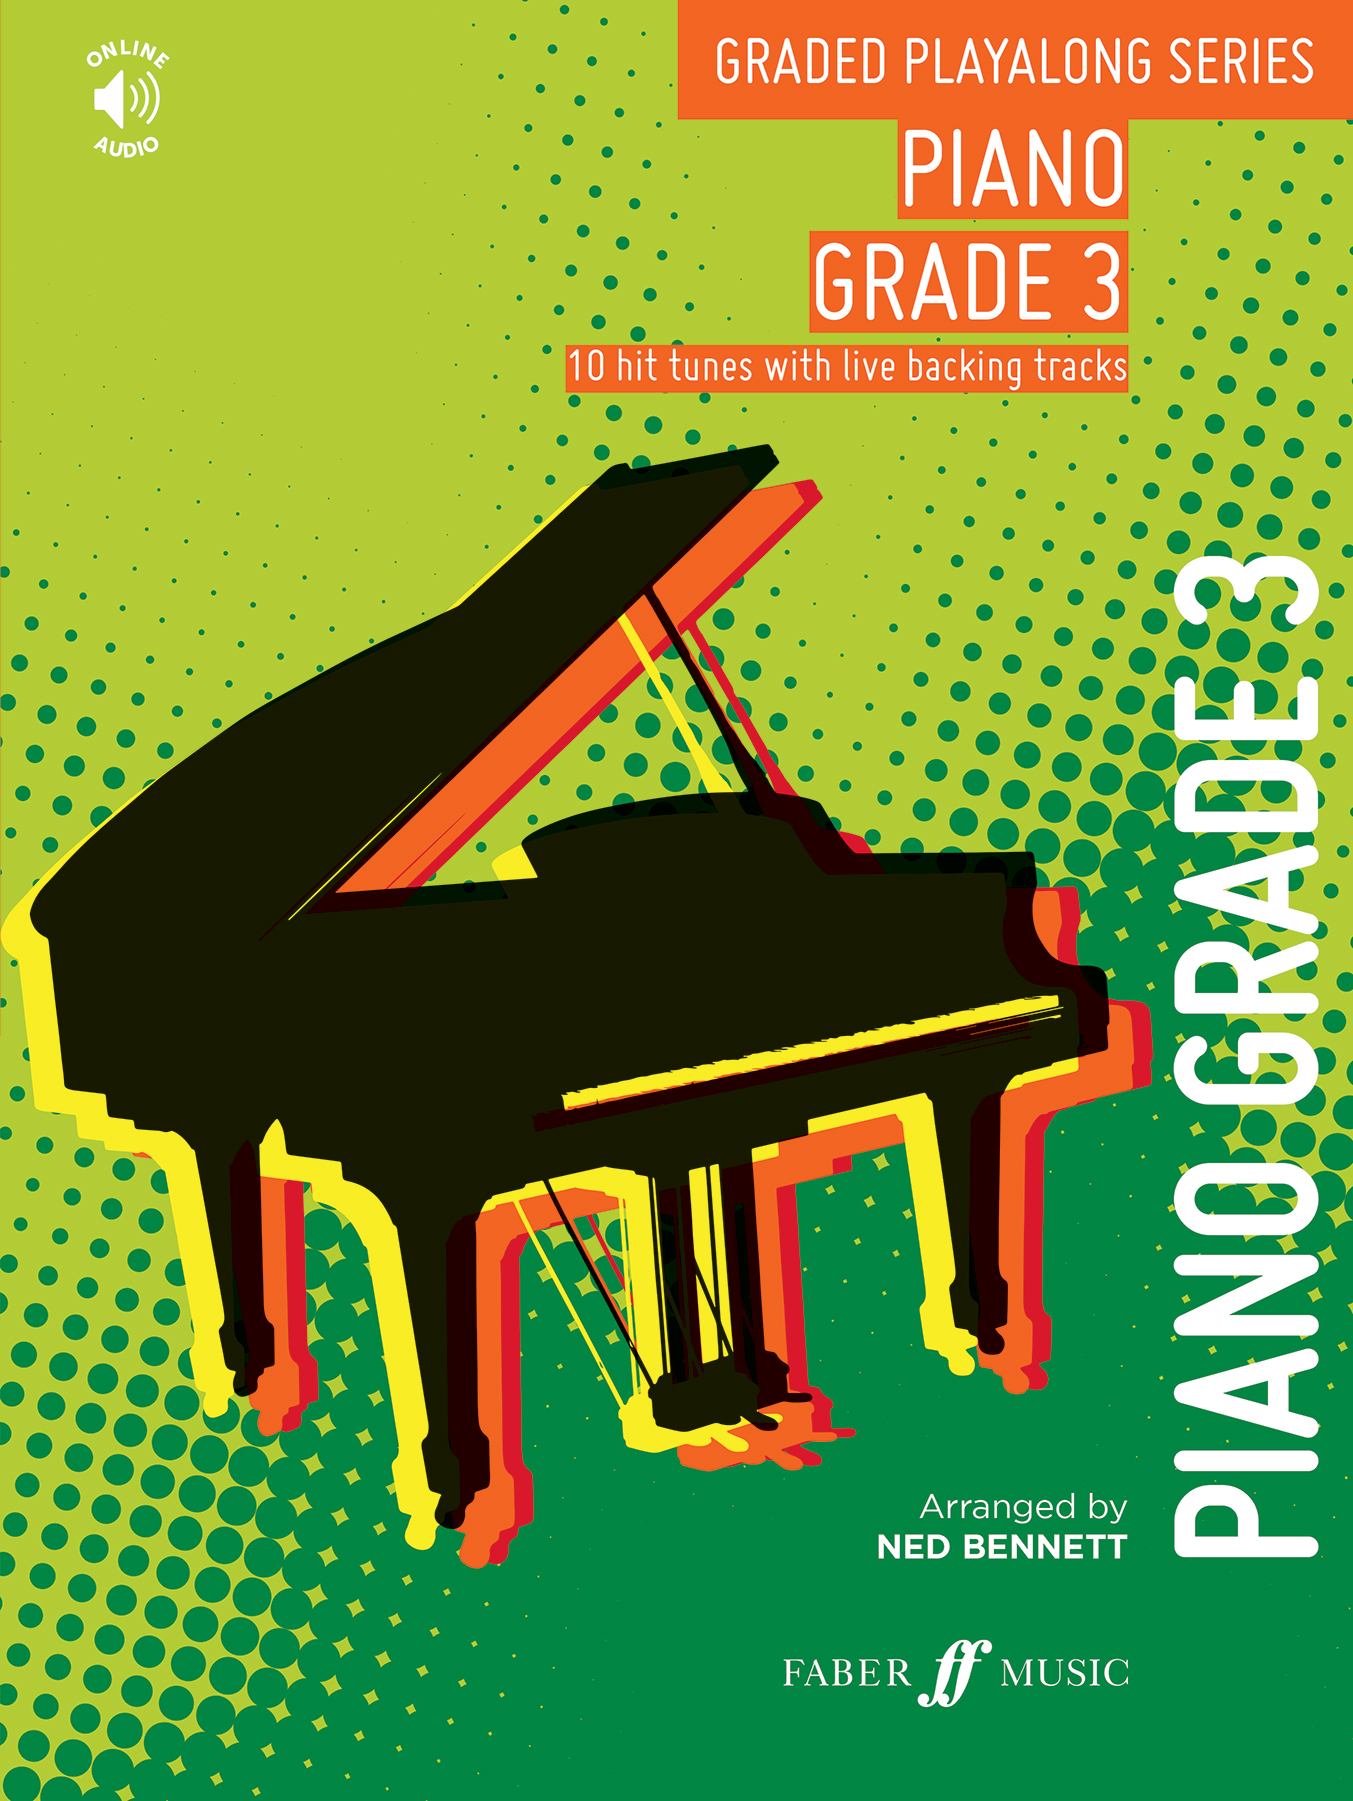 Graded Playalong Series Piano Grade 3 + Online Sheet Music Songbook